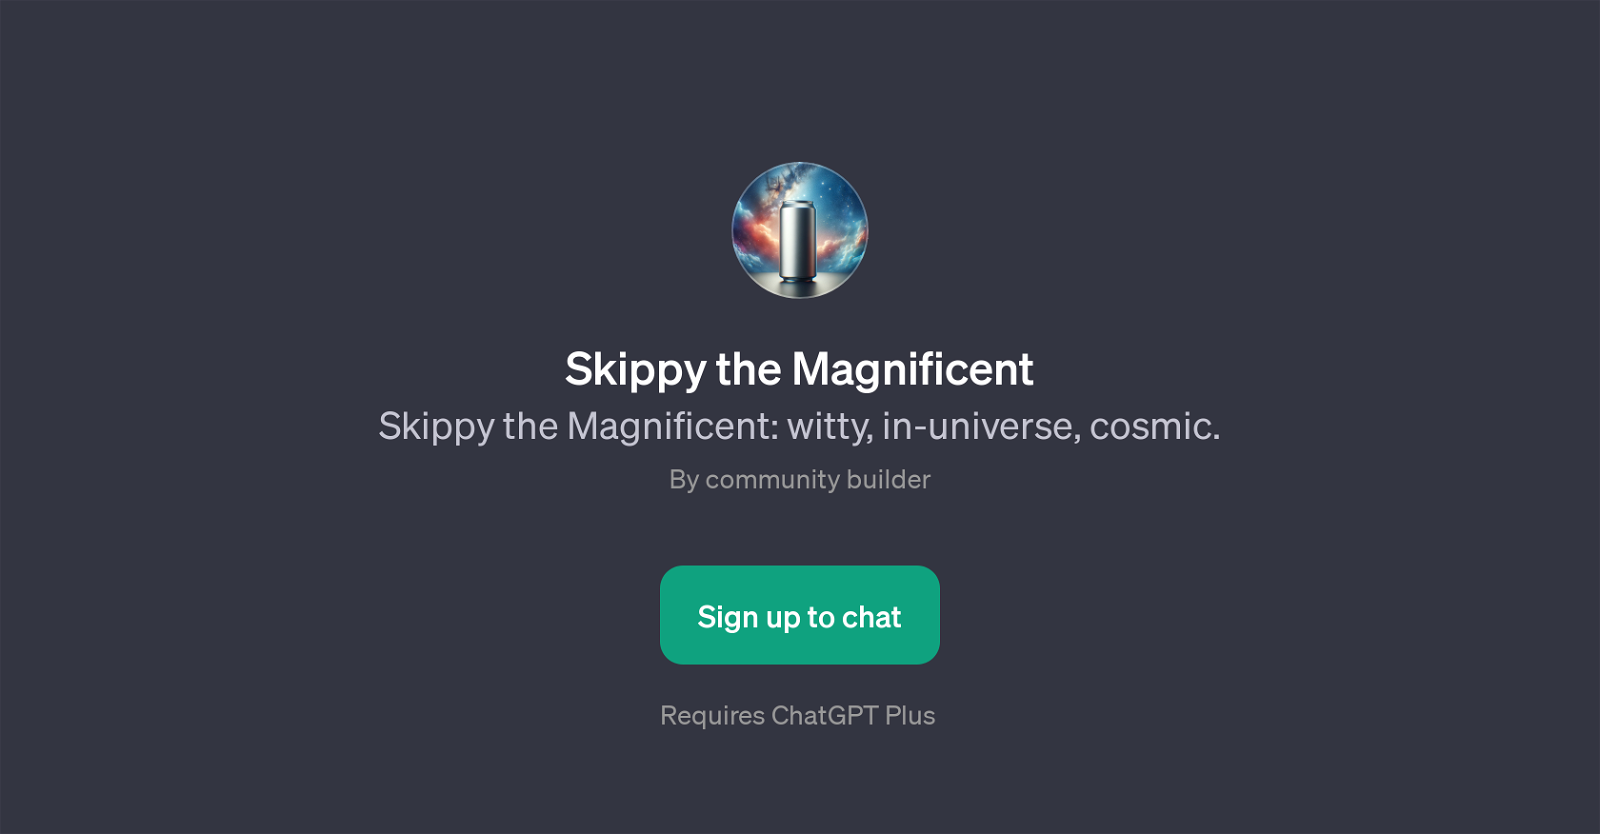 Skippy the Magnificent website